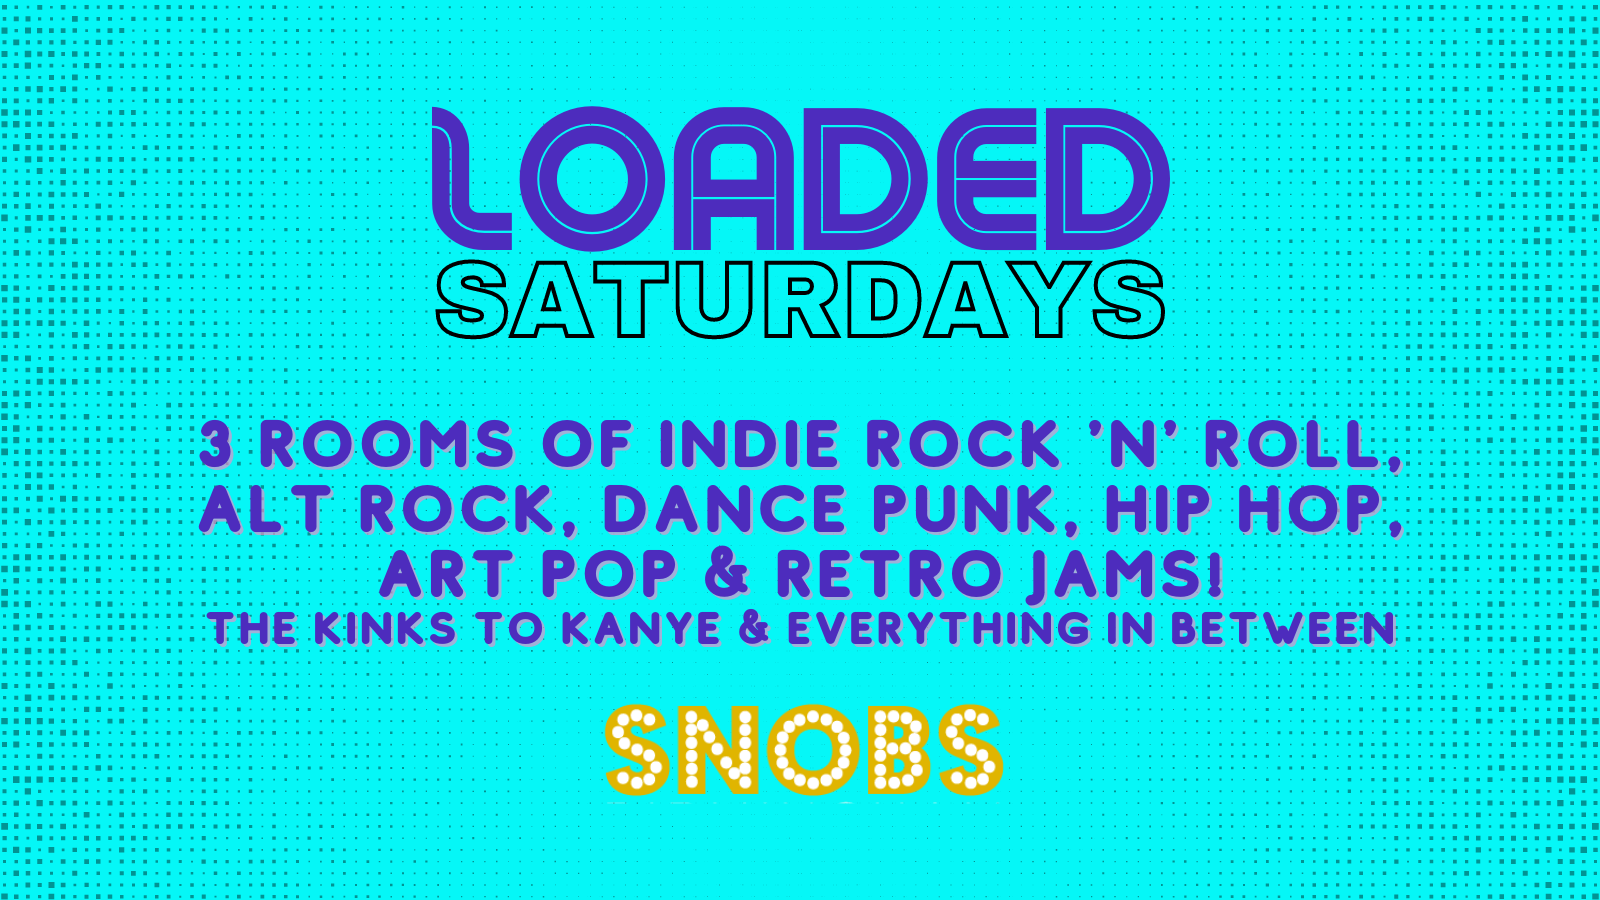 Loaded Saturday 21st August